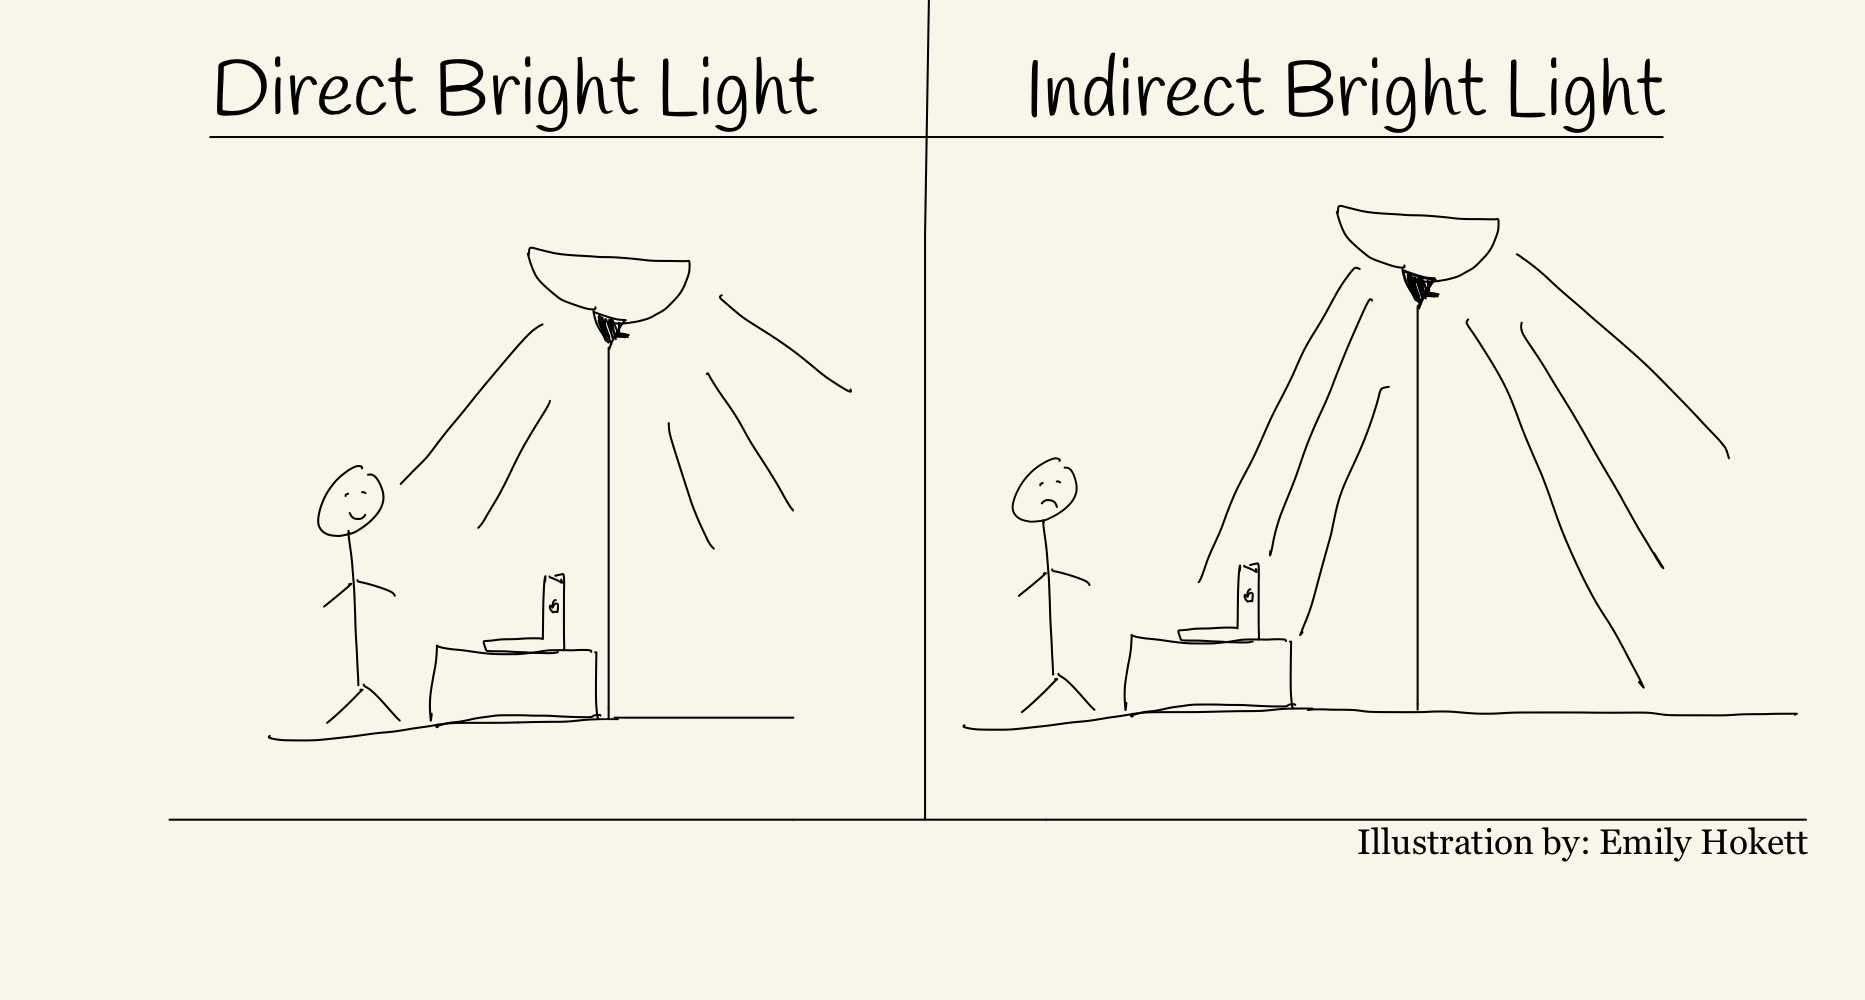 A (simplified and poorly drawn) illustration of lamp placement where someone would get direct light exposure (the light reaches the eye) or indirect light exposure (the light is in the workspace, but does not reach the person).